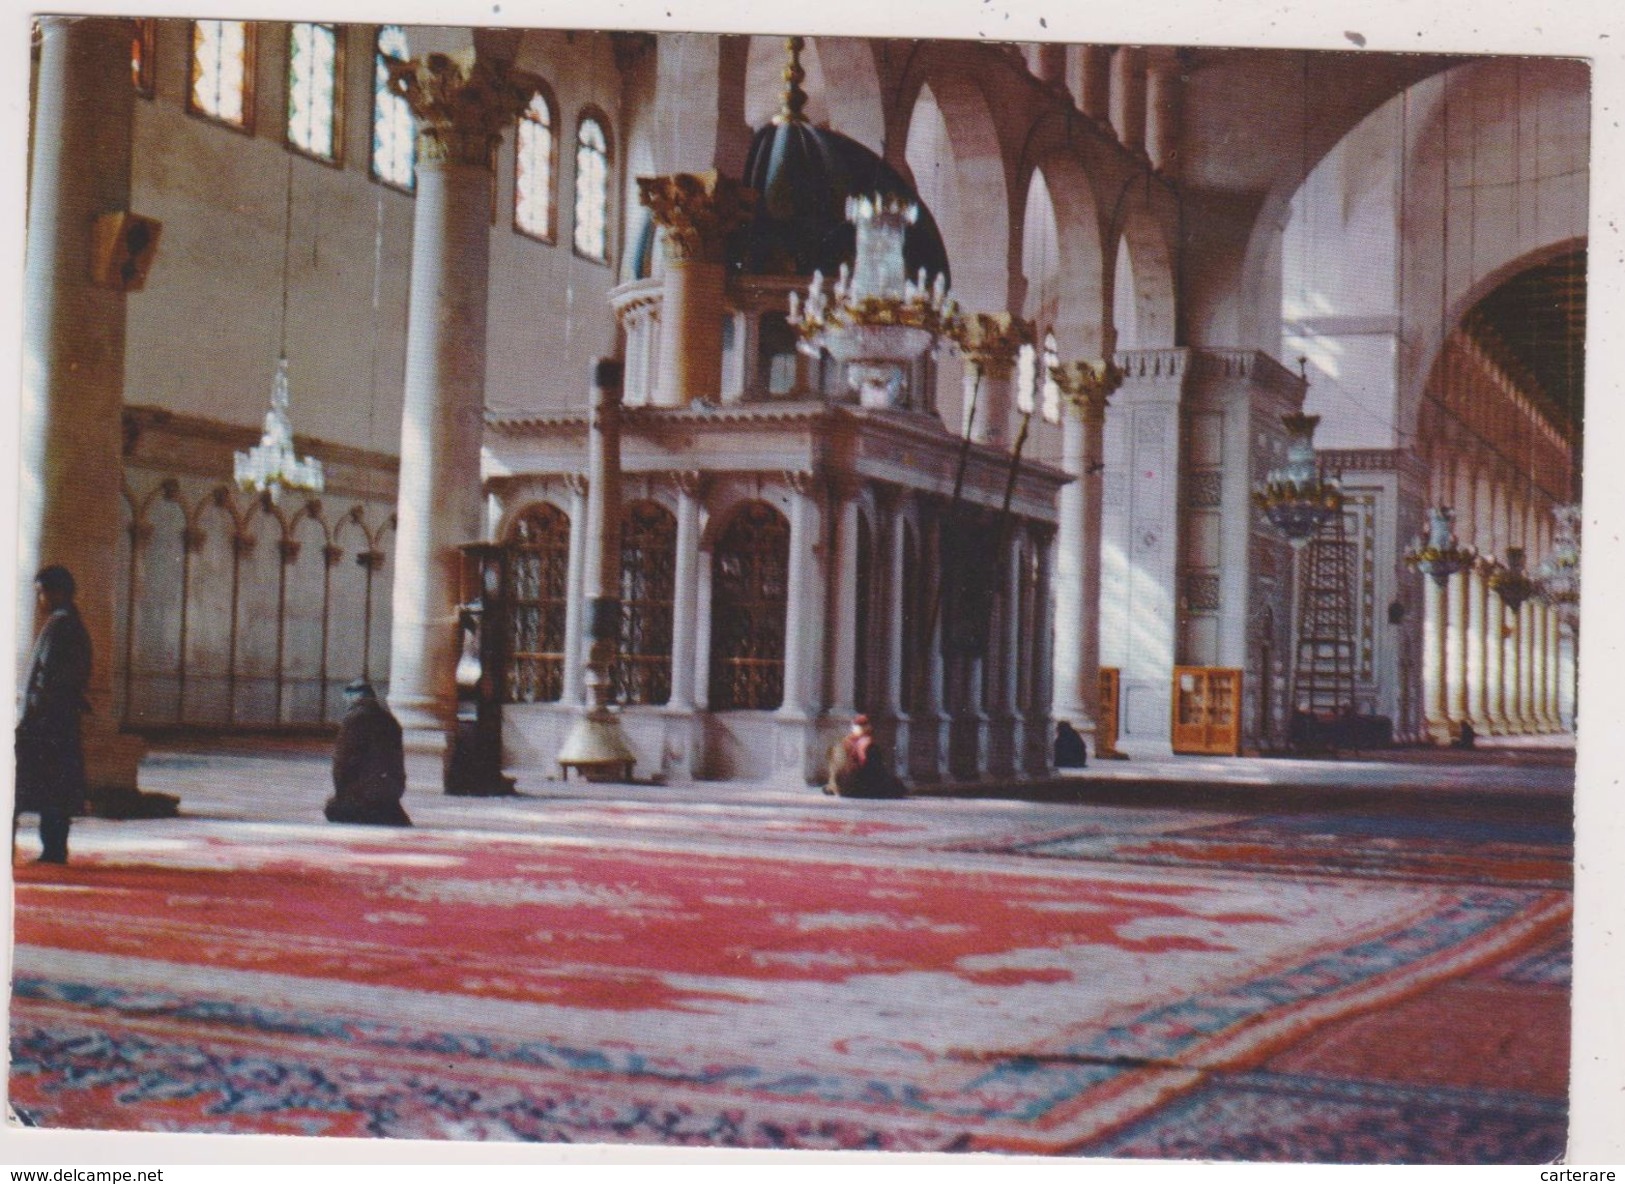 SYRIA,syrie,asie,asia,DAMASCUS,OMAYAD,MOSQUE,MOSQUEE DE DAMAS,TOMBE - Syrien